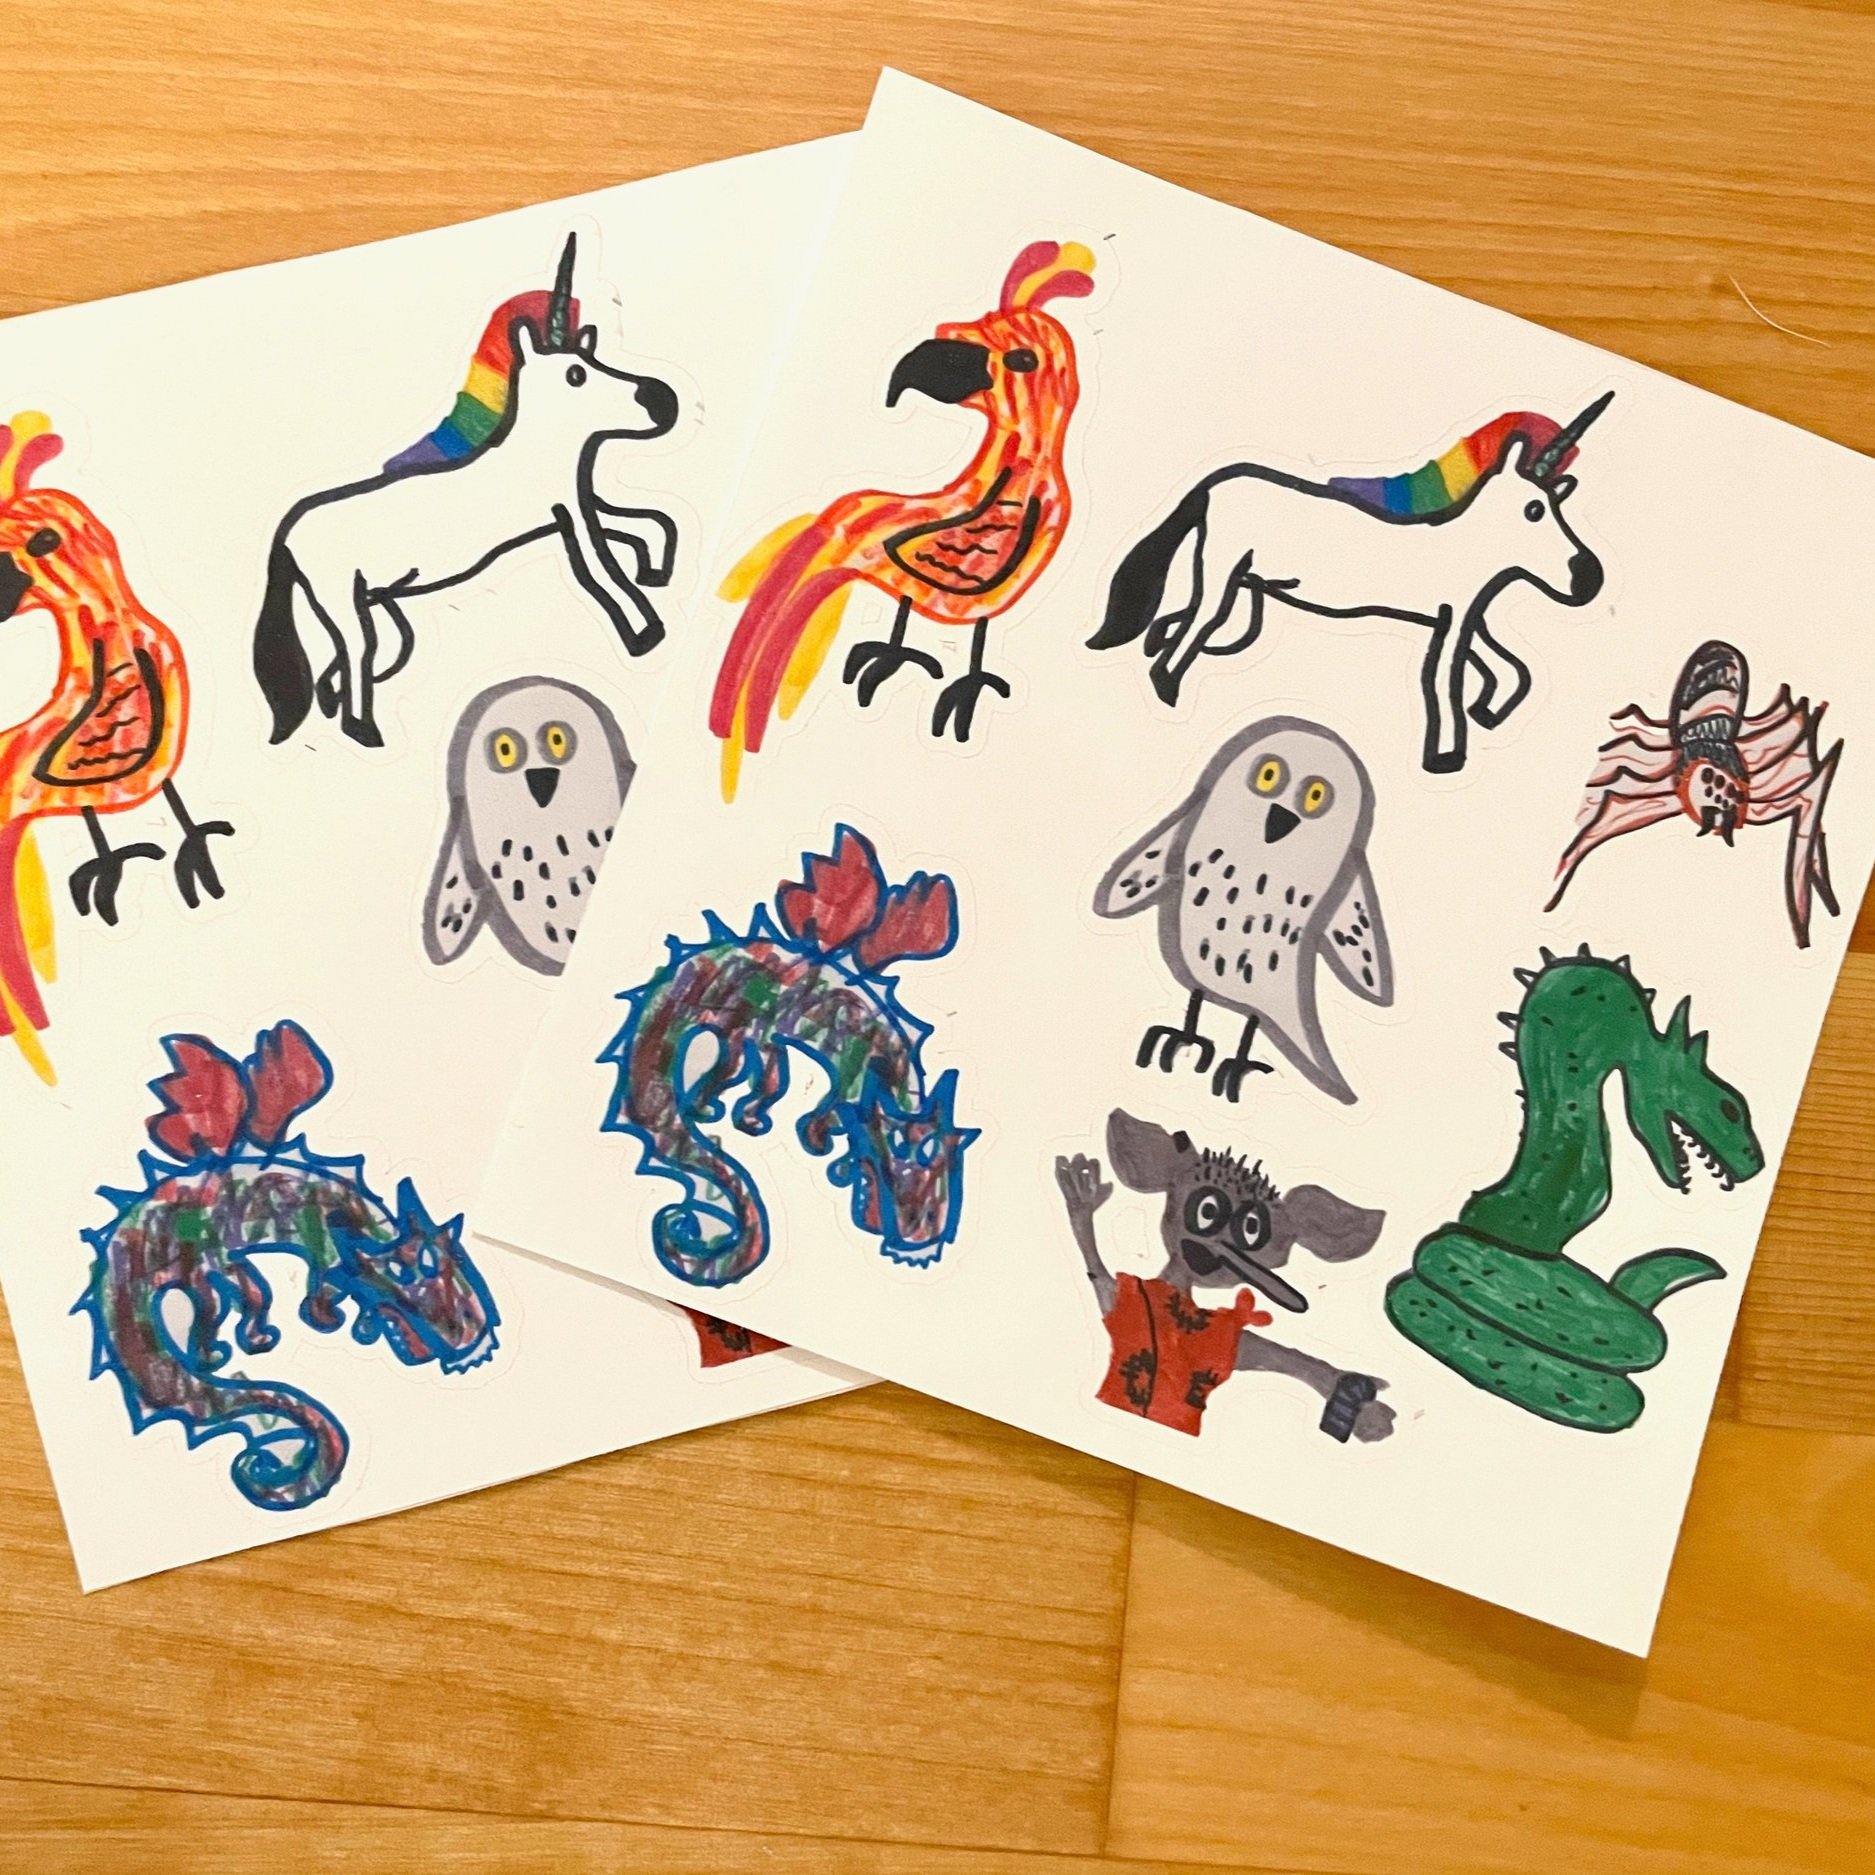 19 Fantastic Drawing Gifts for Kids (That Are Great for Homeschool Too!)